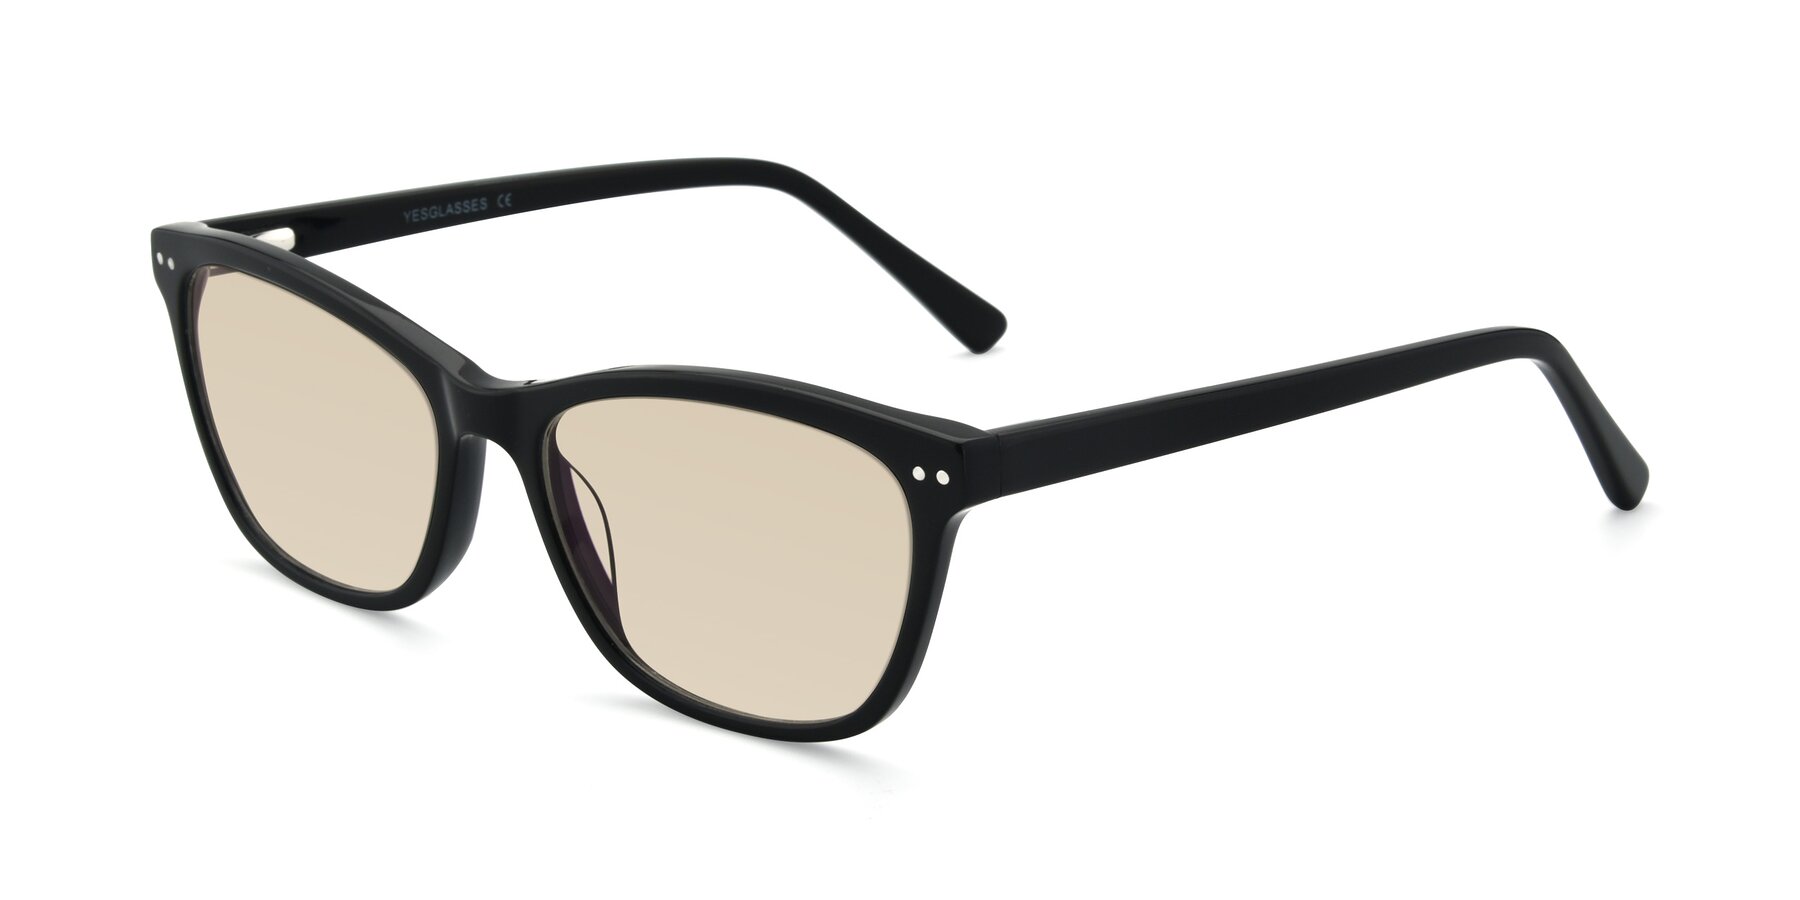 Angle of 17350 in Black with Light Brown Tinted Lenses